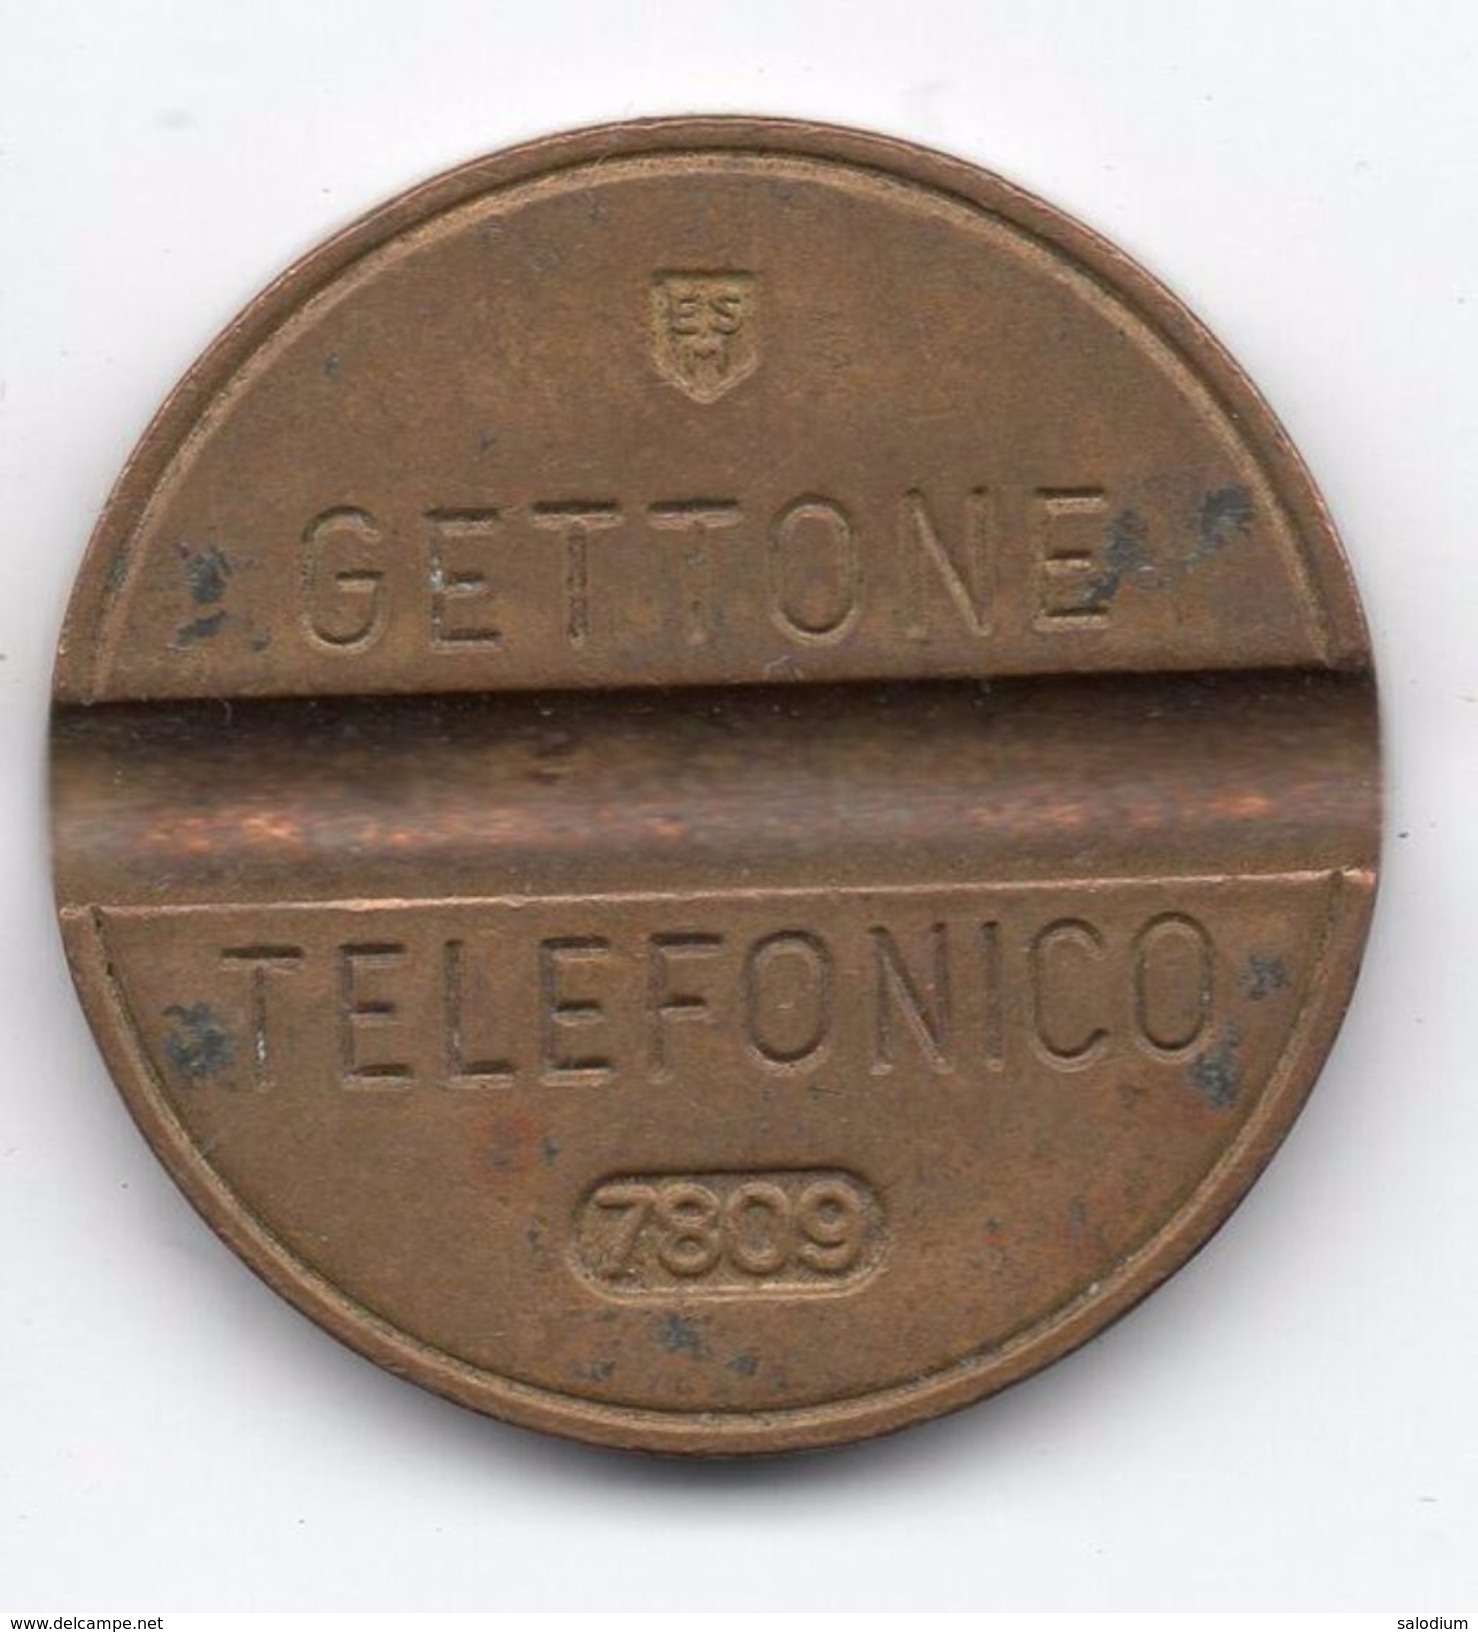 Gettone Telefonico 7809  Token Telephone - (Id-624) - Professionals/Firms